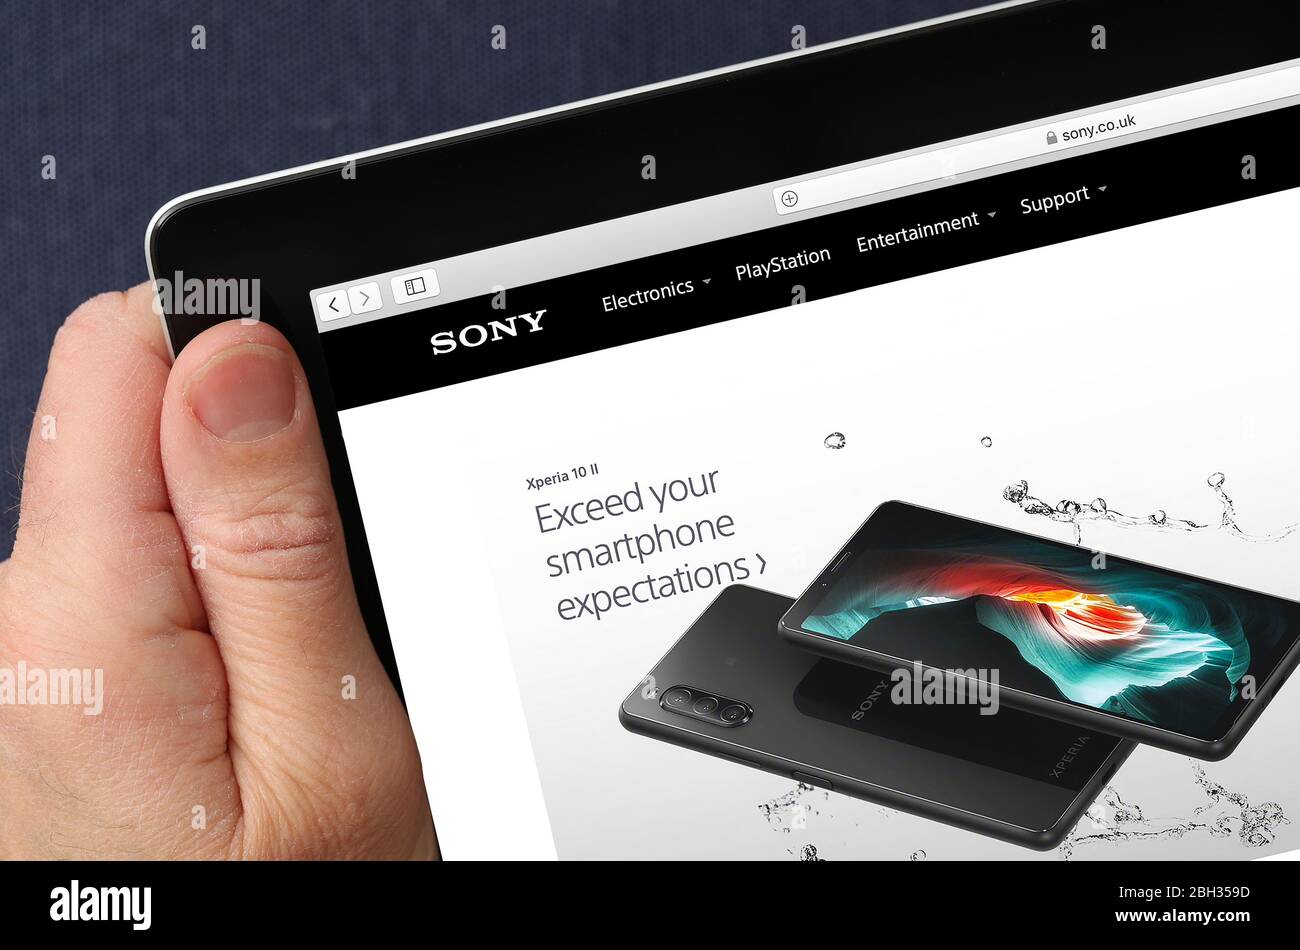 Sony website viewed on an iPad (editorial use only) Stock Photo